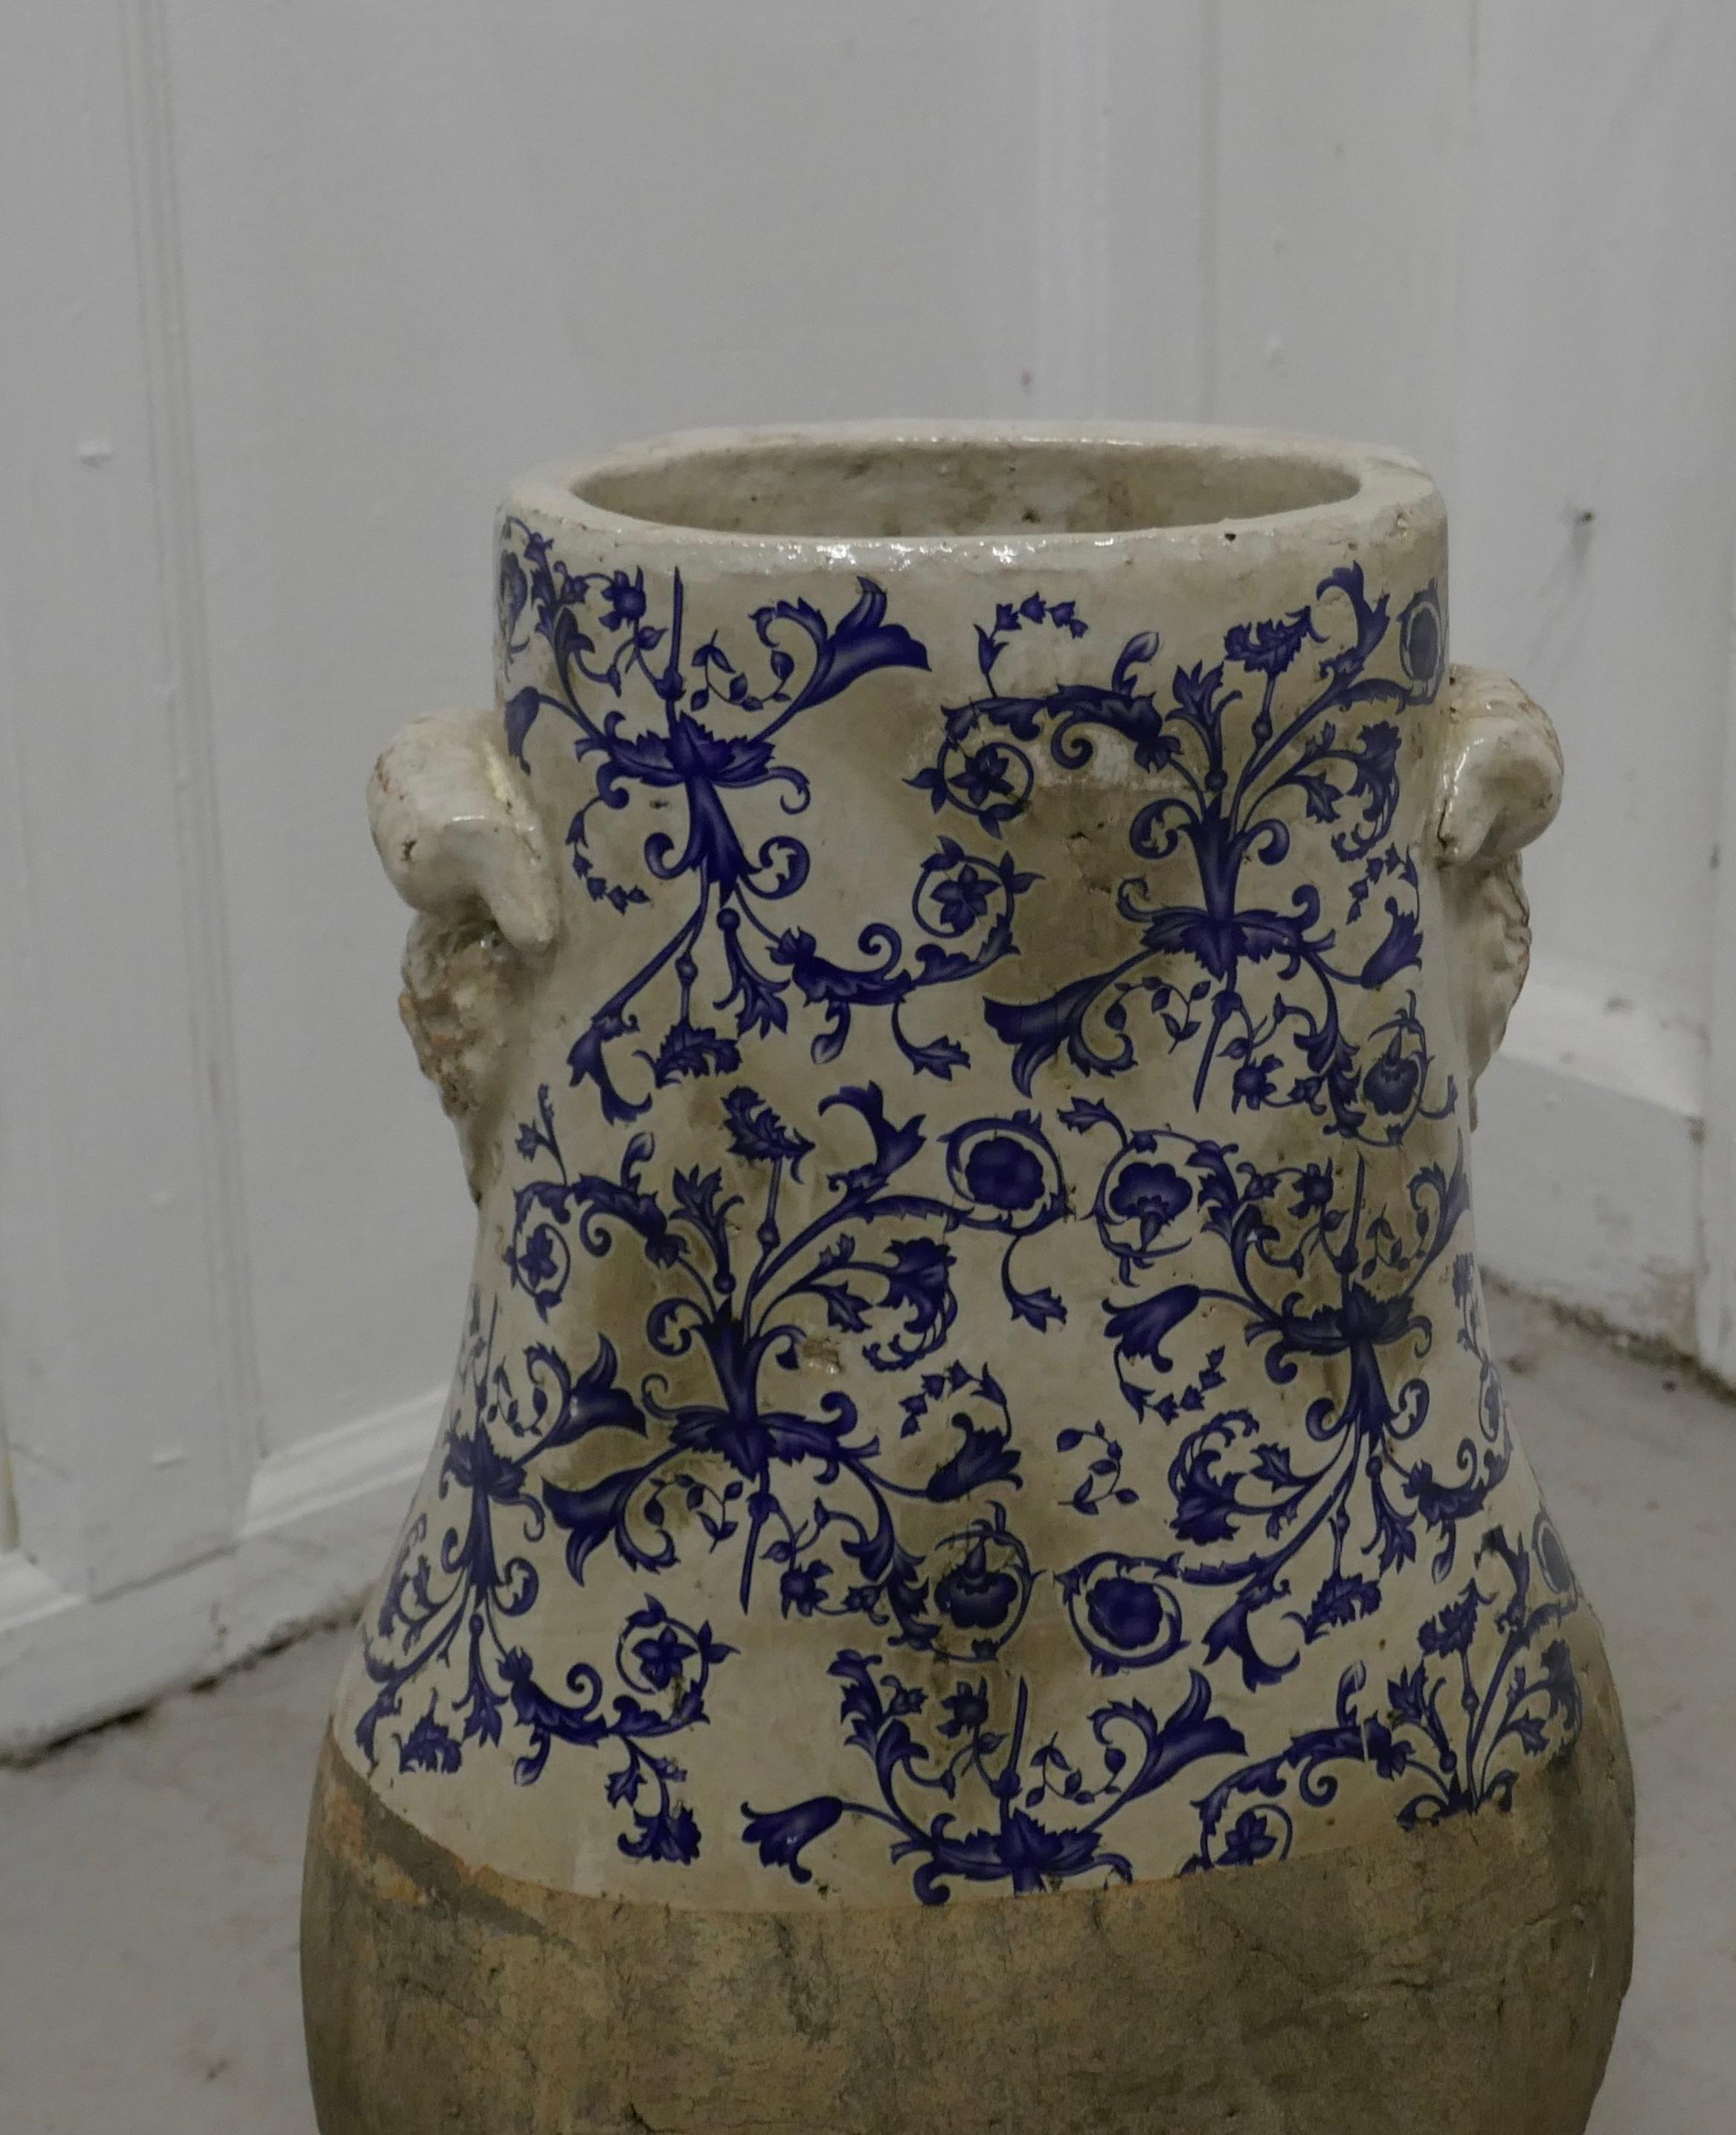 Very heavy 19th century Dutch Delft Earthenware cooler pot

A lovey piece hand painted and fired to be weather resistant, the larger lower part of the pot would have been buried to keep the contents cool, (possibly a dairy Pot)
The pot has sturdy